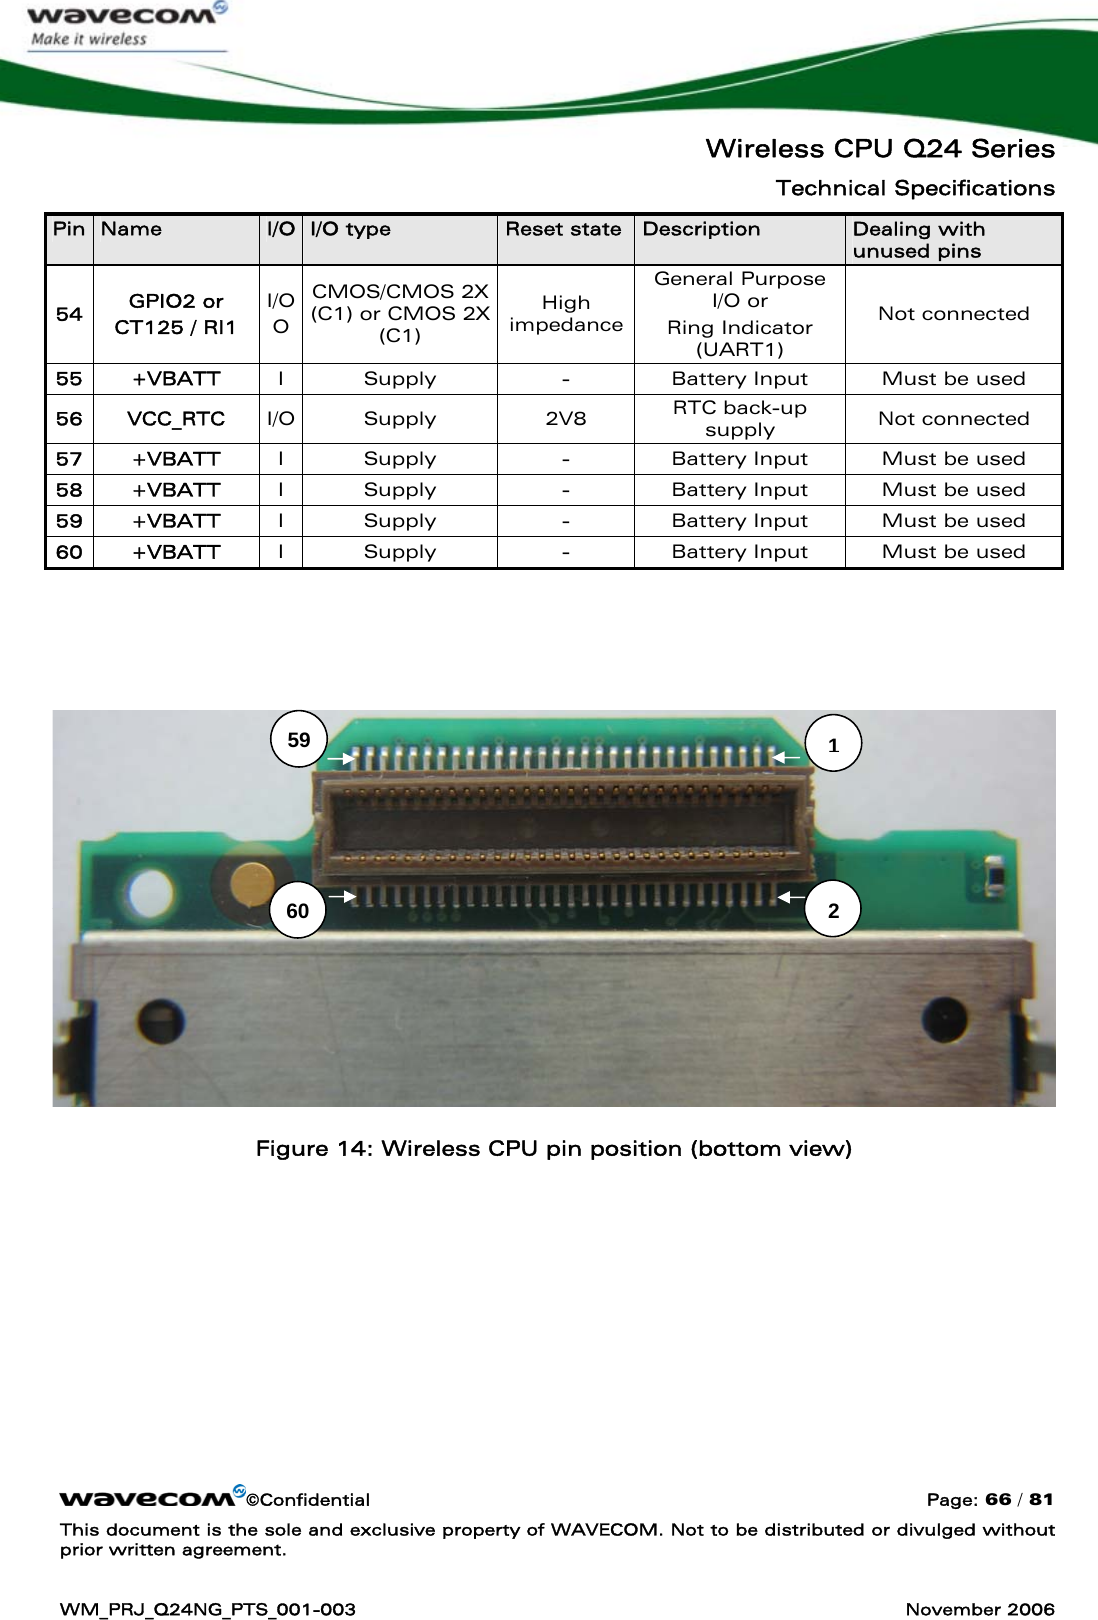   Wireless CPU Q24 Series Technical Specifications ©Confidential  Page: 66 / 81 This document is the sole and exclusive property of WAVECOM. Not to be distributed or divulged without prior written agreement.  WM_PRJ_Q24NG_PTS_001-003  November 2006  Pin  Name  I/O  I/O type  Reset state  Description  Dealing with unused pins 54  GPIO2 or CT125 / RI1 I/O O CMOS/CMOS 2X (C1) or CMOS 2X (C1) High impedance General Purpose I/O or  Ring Indicator (UART1) Not connected 55 +VBATT  I  Supply  -  Battery Input  Must be used 56 VCC_RTC I/O Supply  2V8  RTC back-up supply  Not connected 57 +VBATT  I  Supply  -  Battery Input  Must be used 58 +VBATT  I  Supply  -  Battery Input  Must be used 59 +VBATT  I  Supply  -  Battery Input  Must be used 60 +VBATT  I  Supply  -  Battery Input  Must be used                Figure 14: Wireless CPU pin position (bottom view) 1260 59 